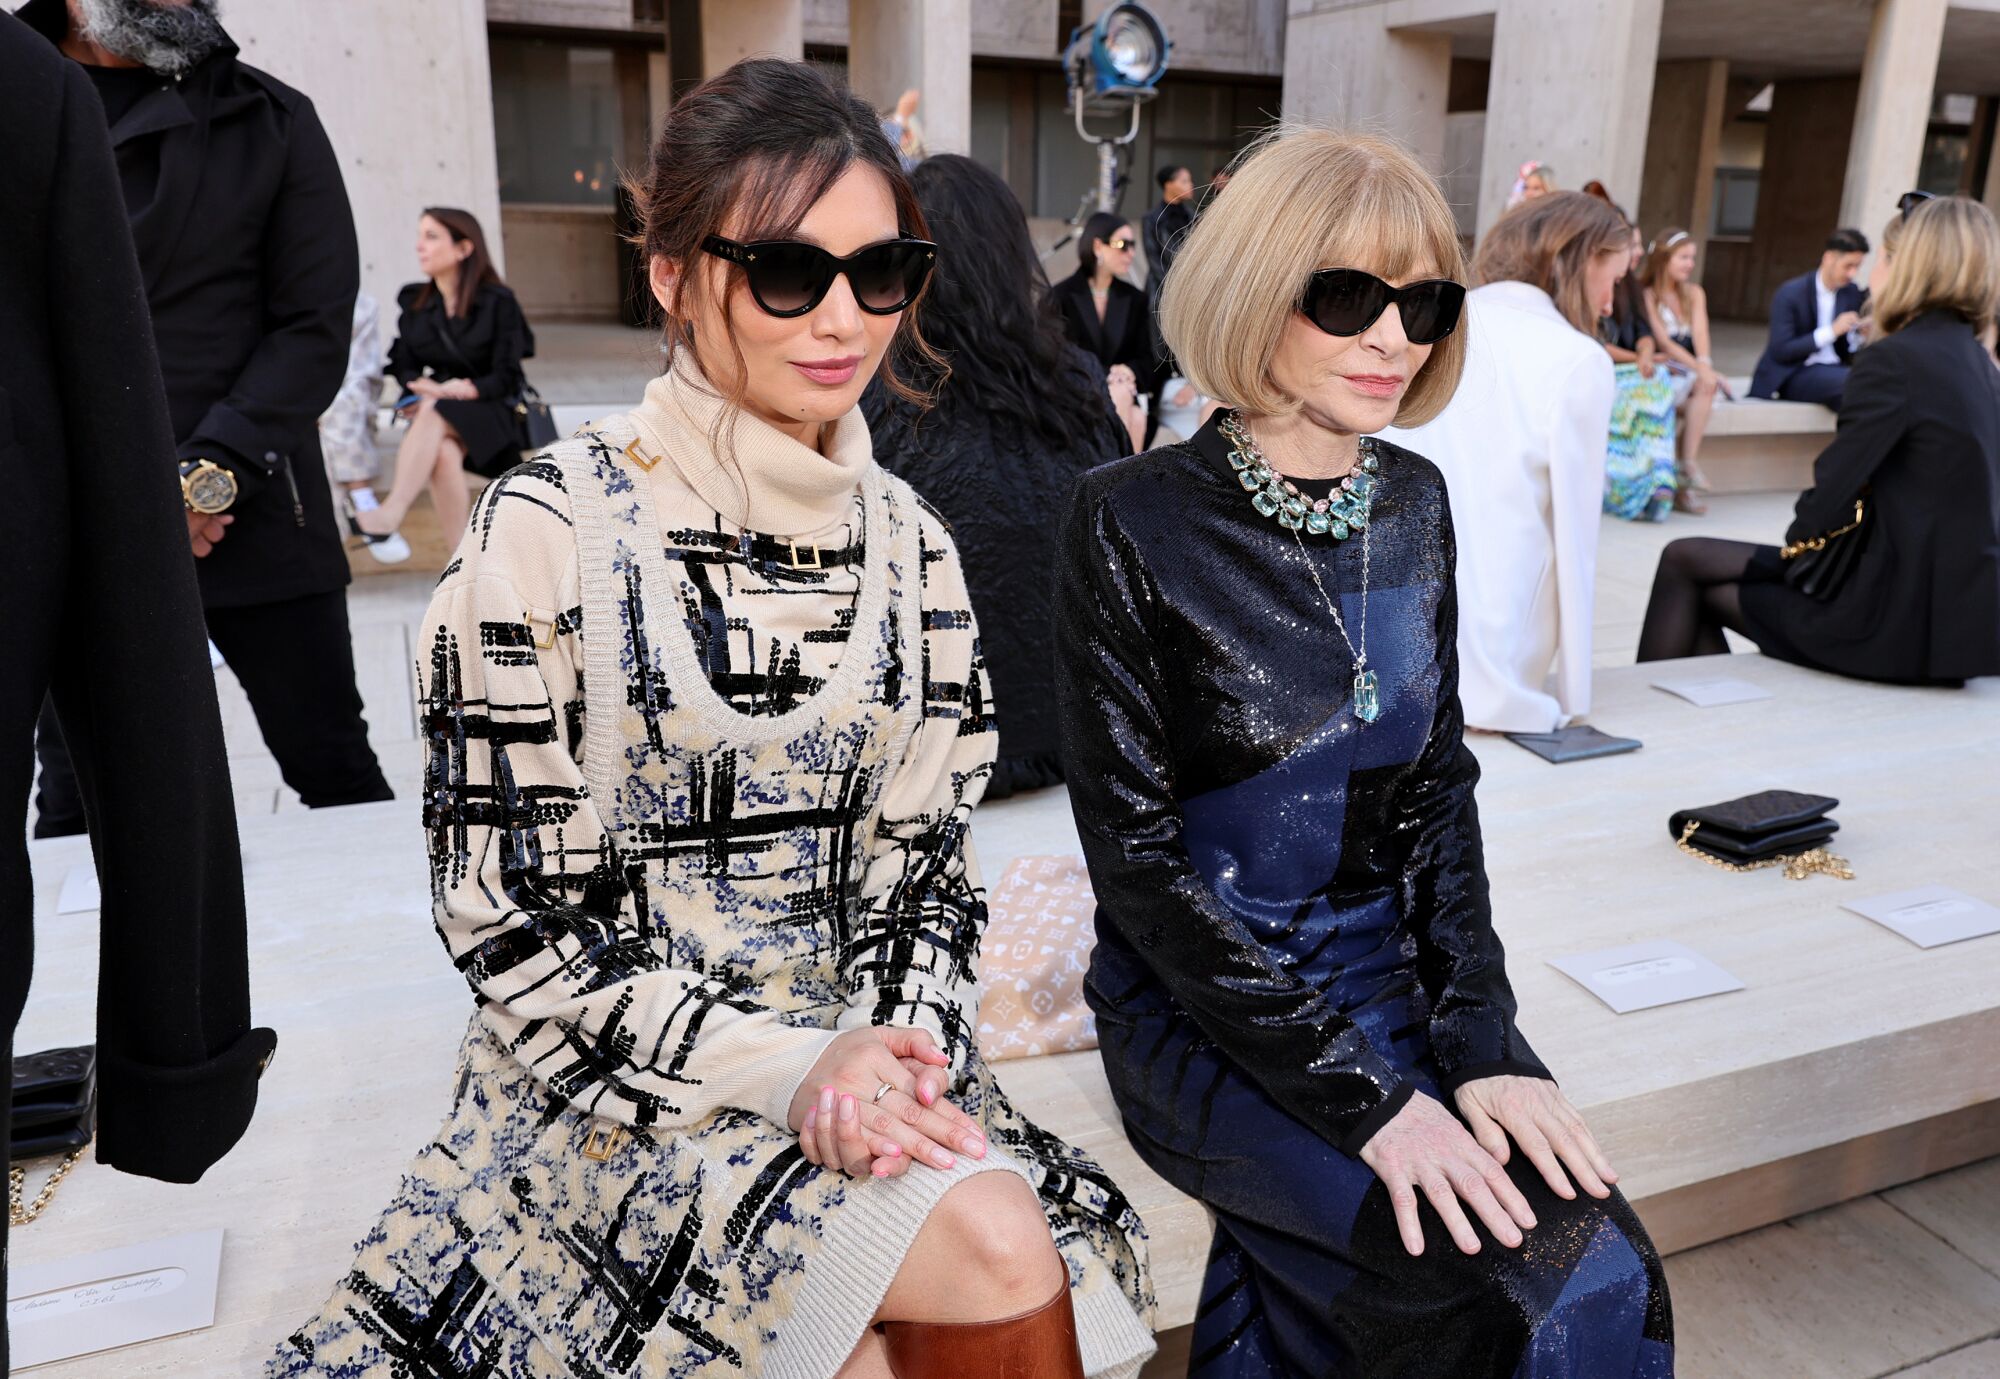 Actress Gemma Chan and Anna Wintour, editor-in-chief of Vogue, attend Louis Vuitton’s 2023 Cruise show at the Salk Institute.